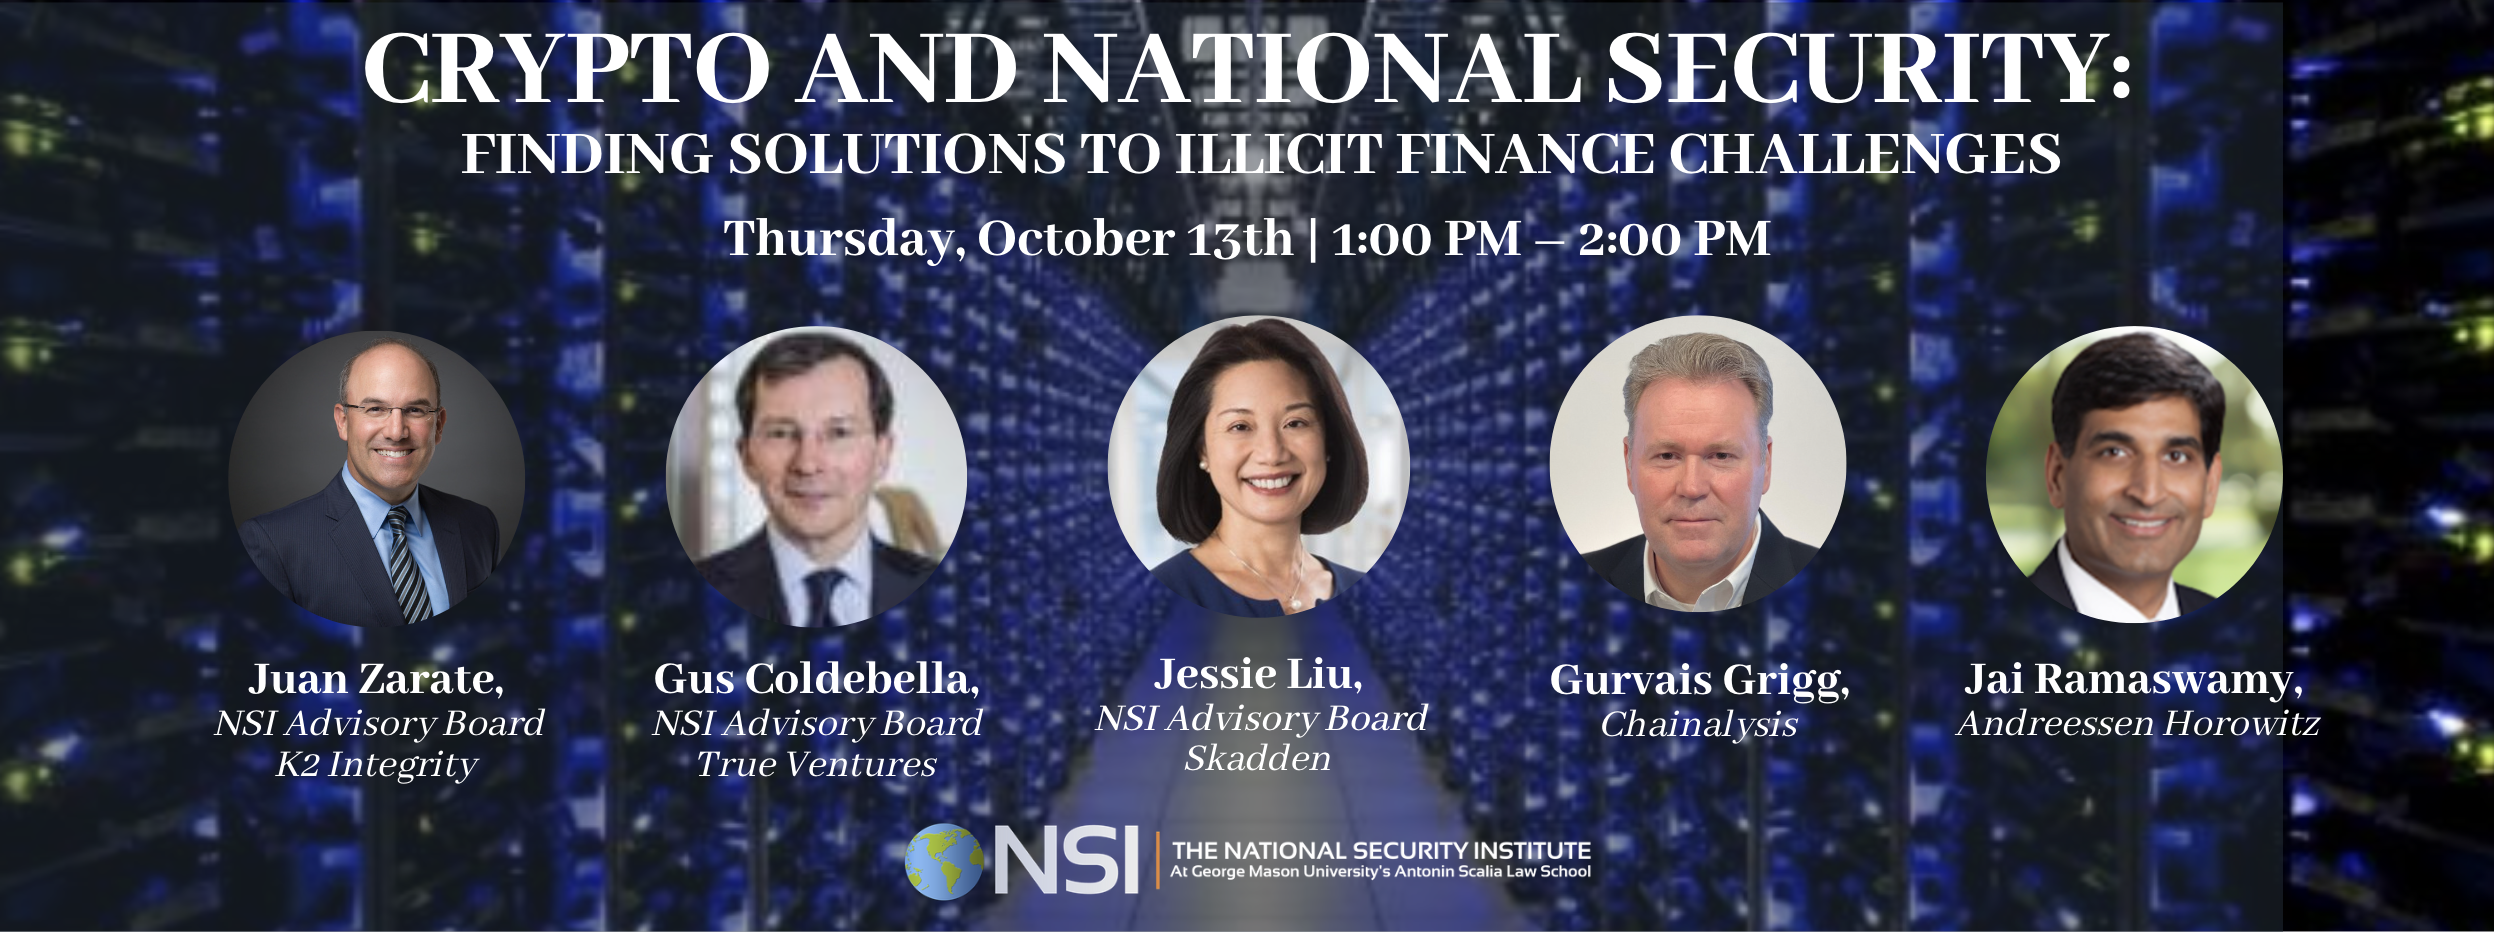 Crypto and National Security: Finding Solutions to Illicit Finance Challenges